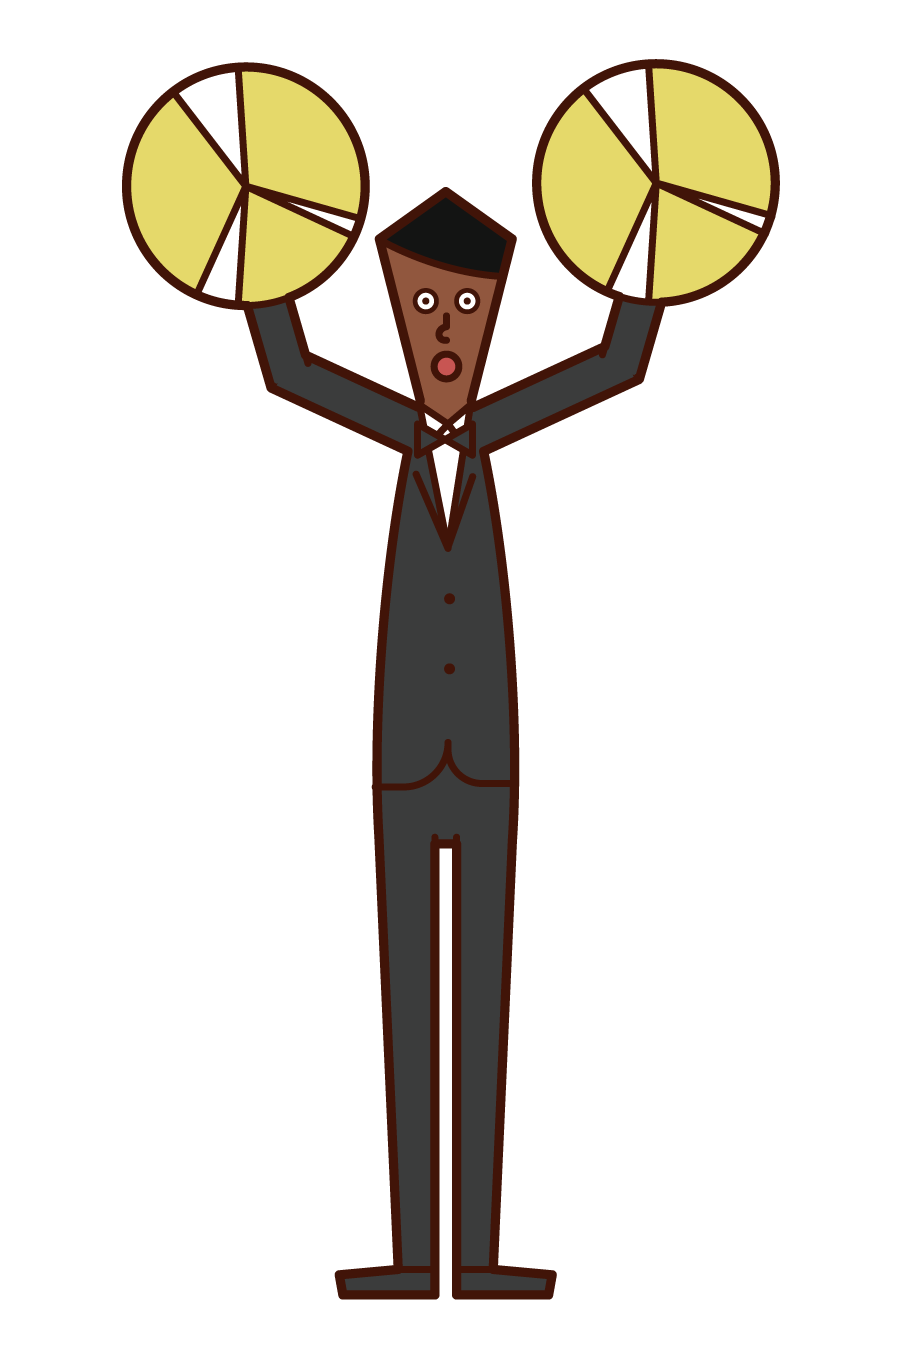 Illustration of a man playing a cymbal